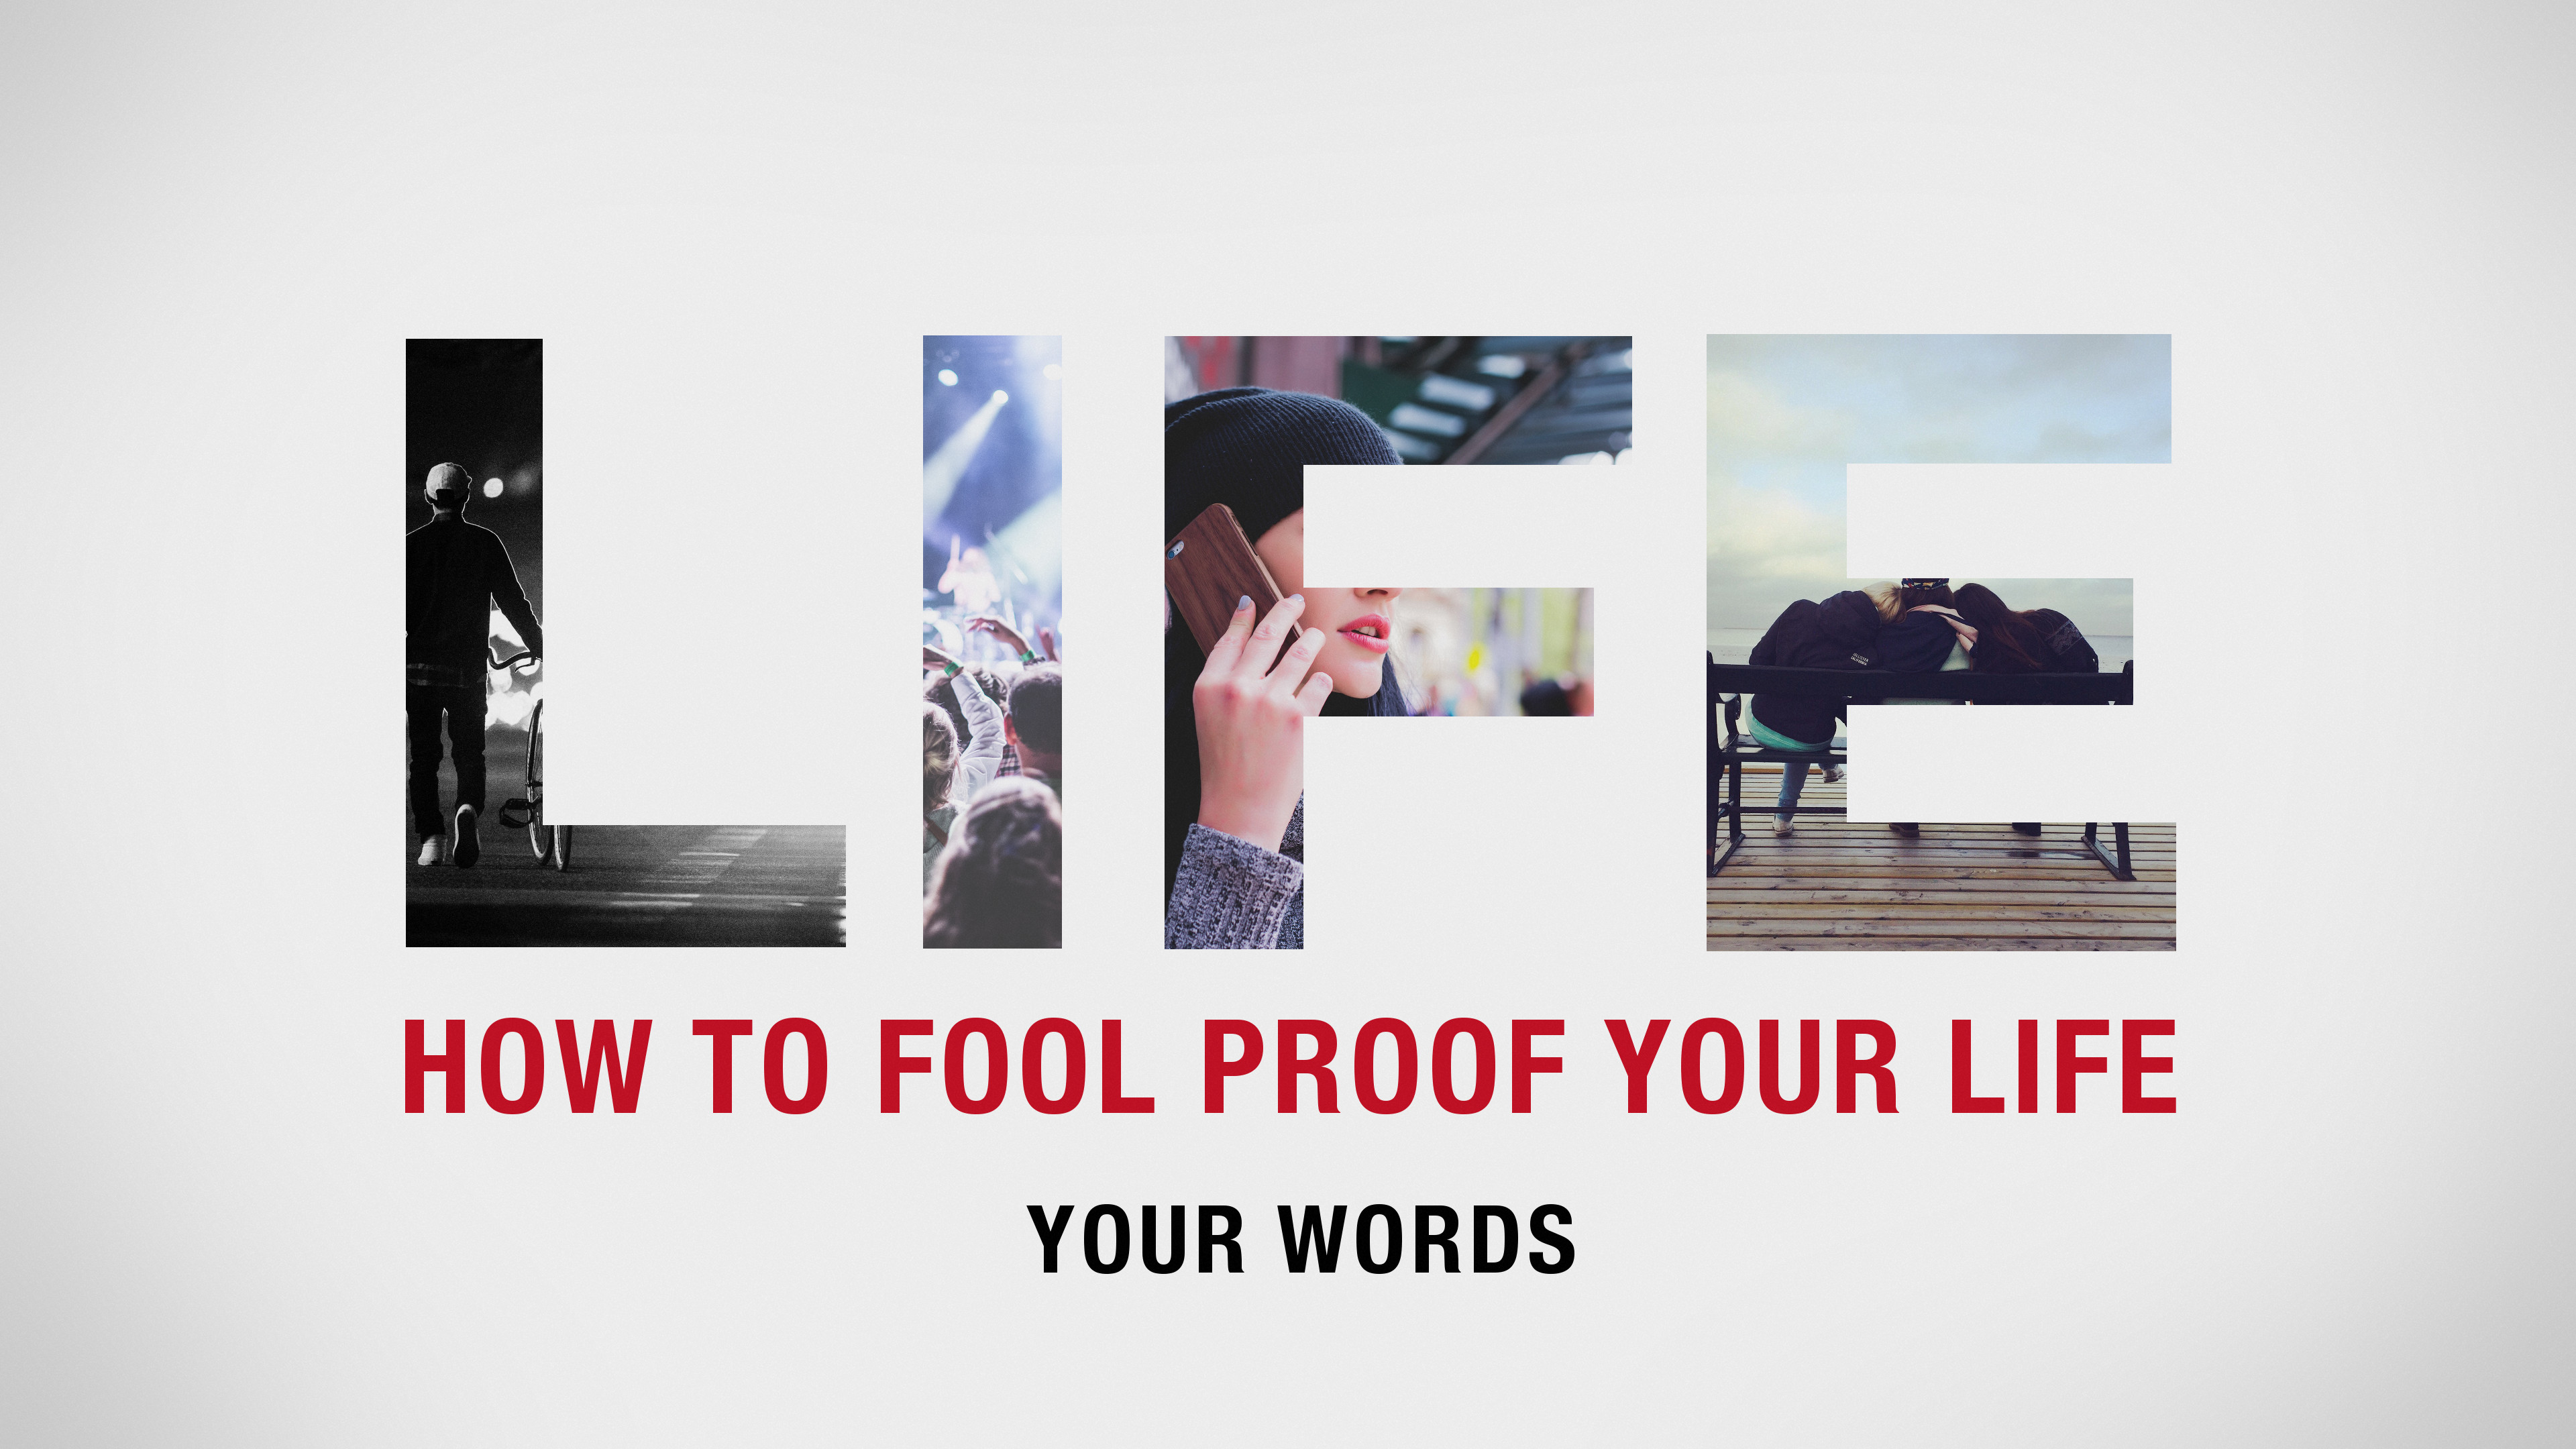 LIFE | Your Words